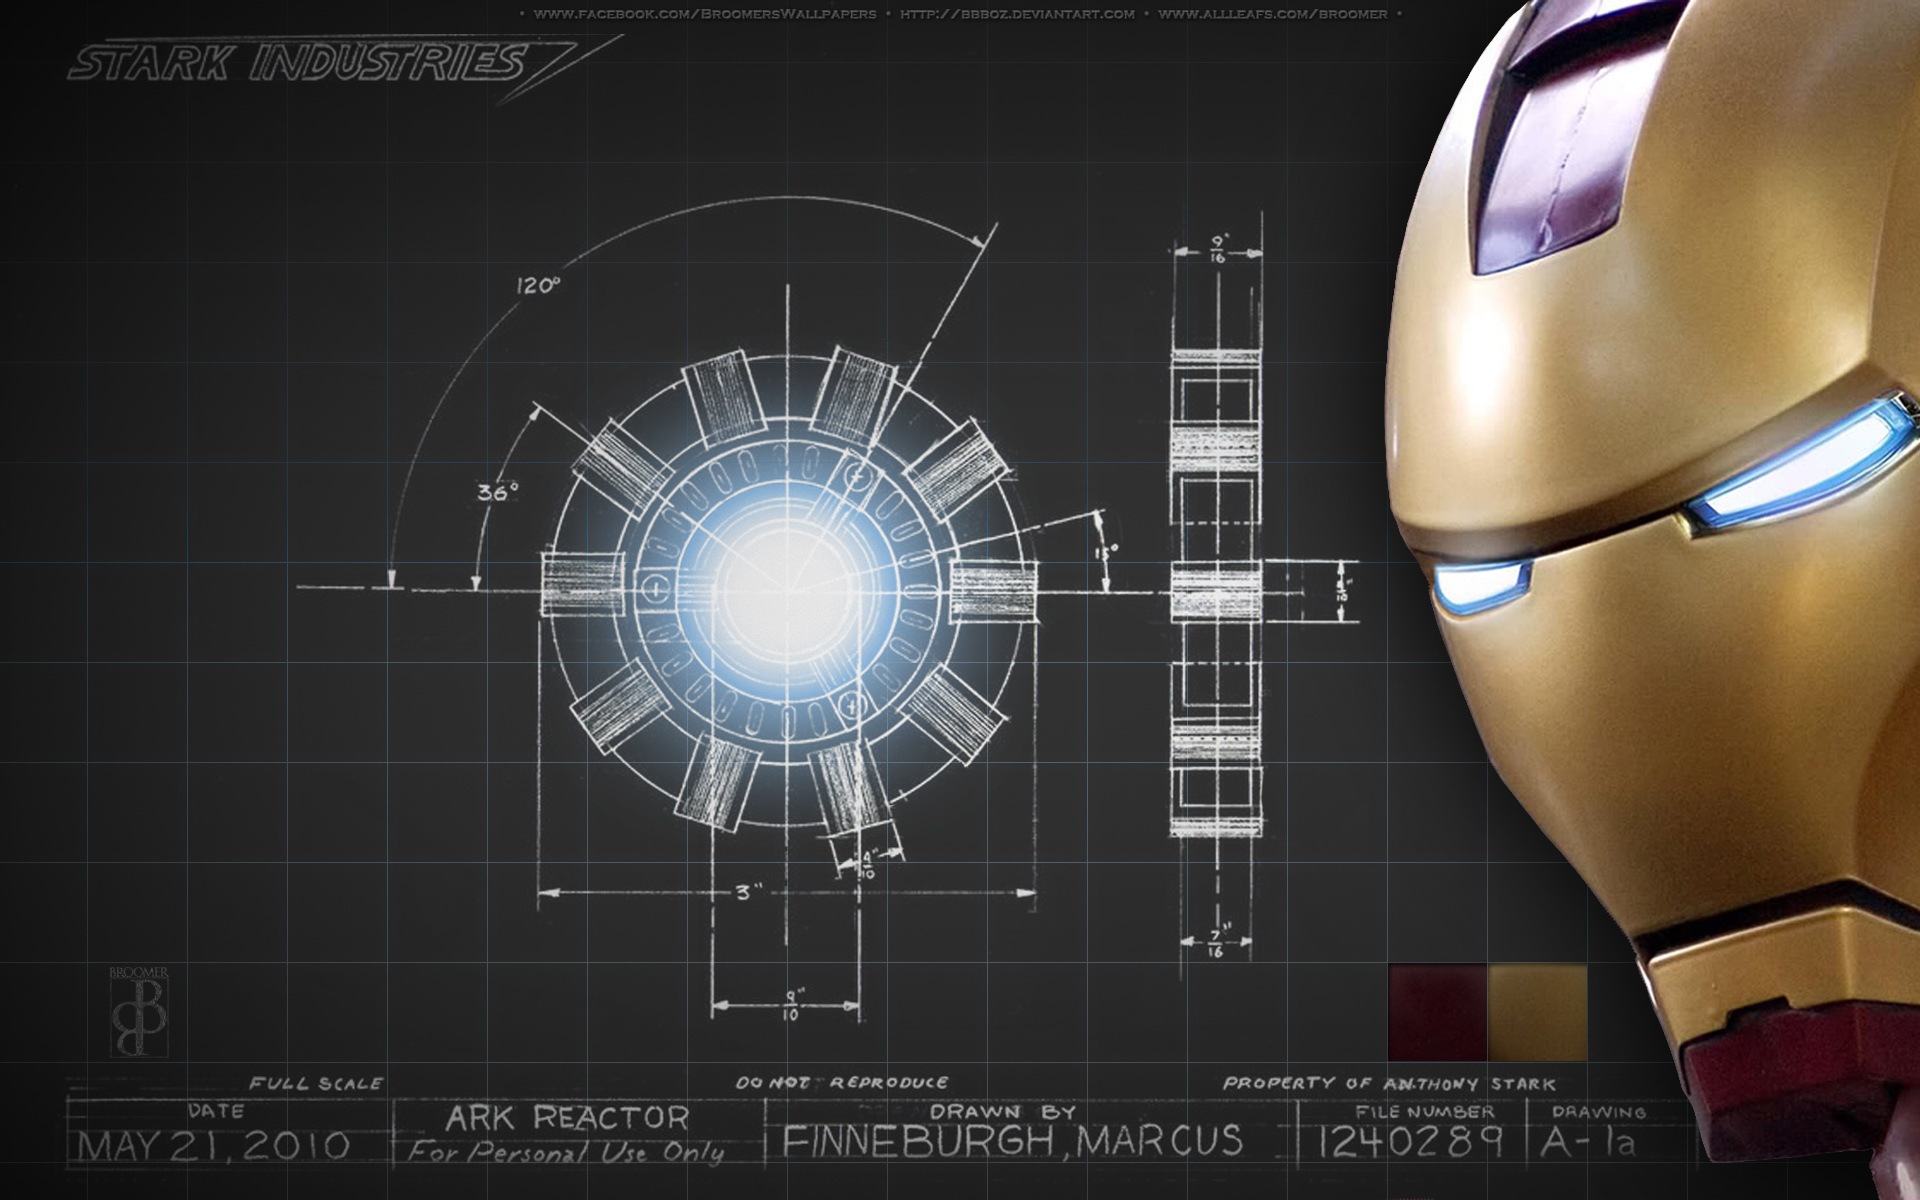 Cool Iron Man Background Wallpaper By Bbboz